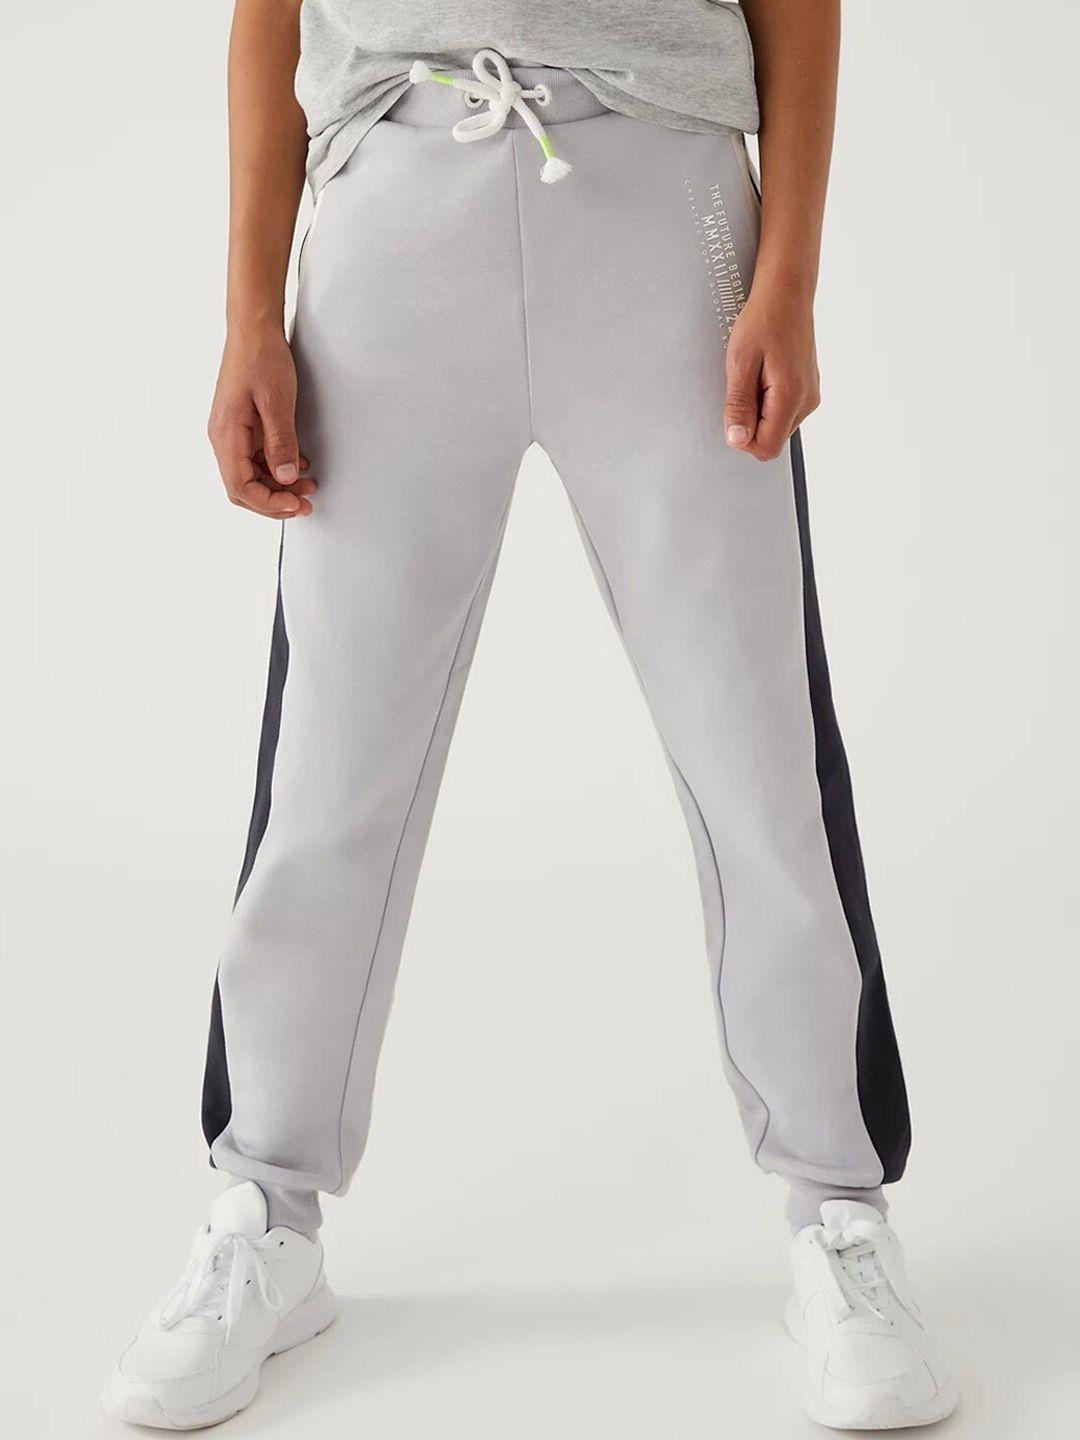 marks & spencer boys mid rise joggers